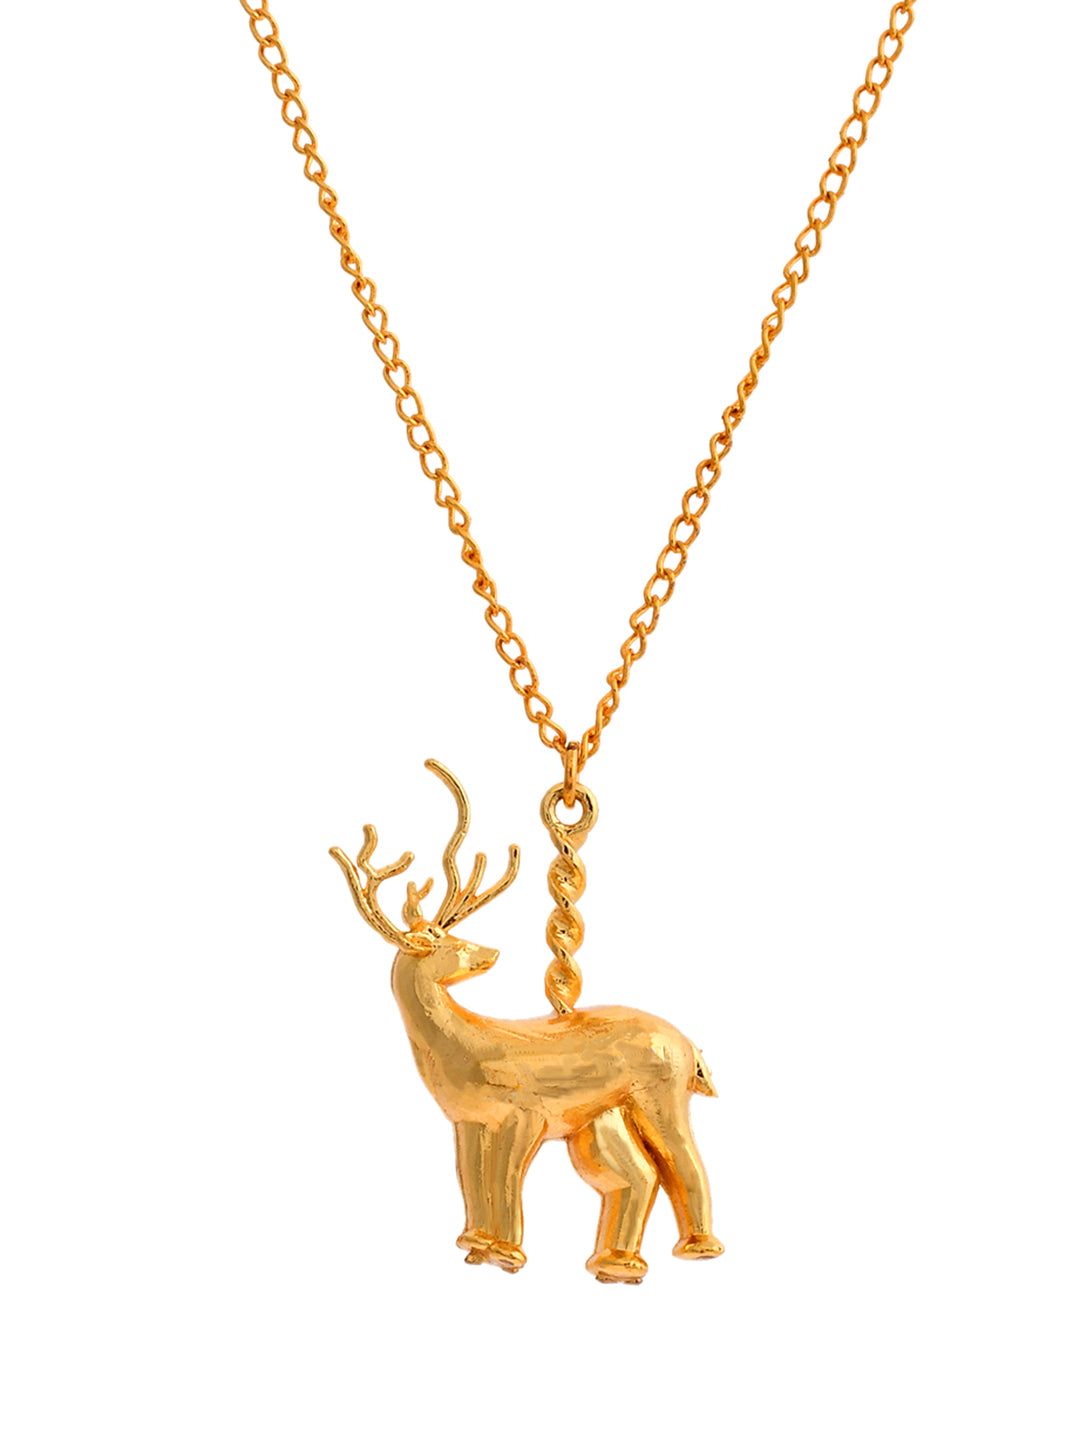 Gold Plated Handcrafted Pendant Necklace